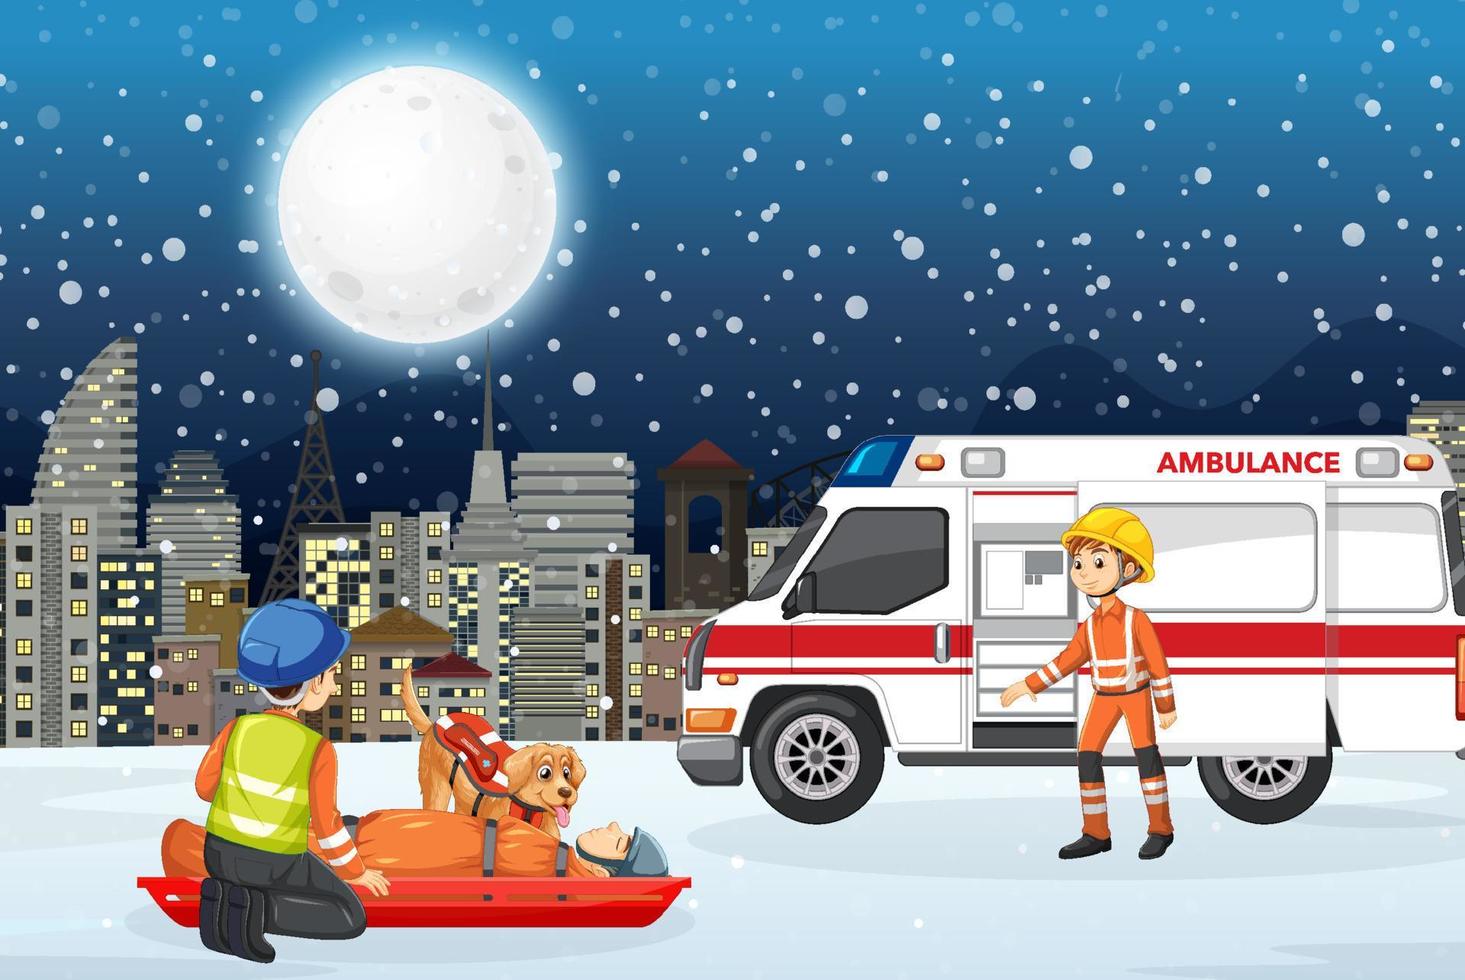 Snow scene with firerman rescue in cartoon style vector